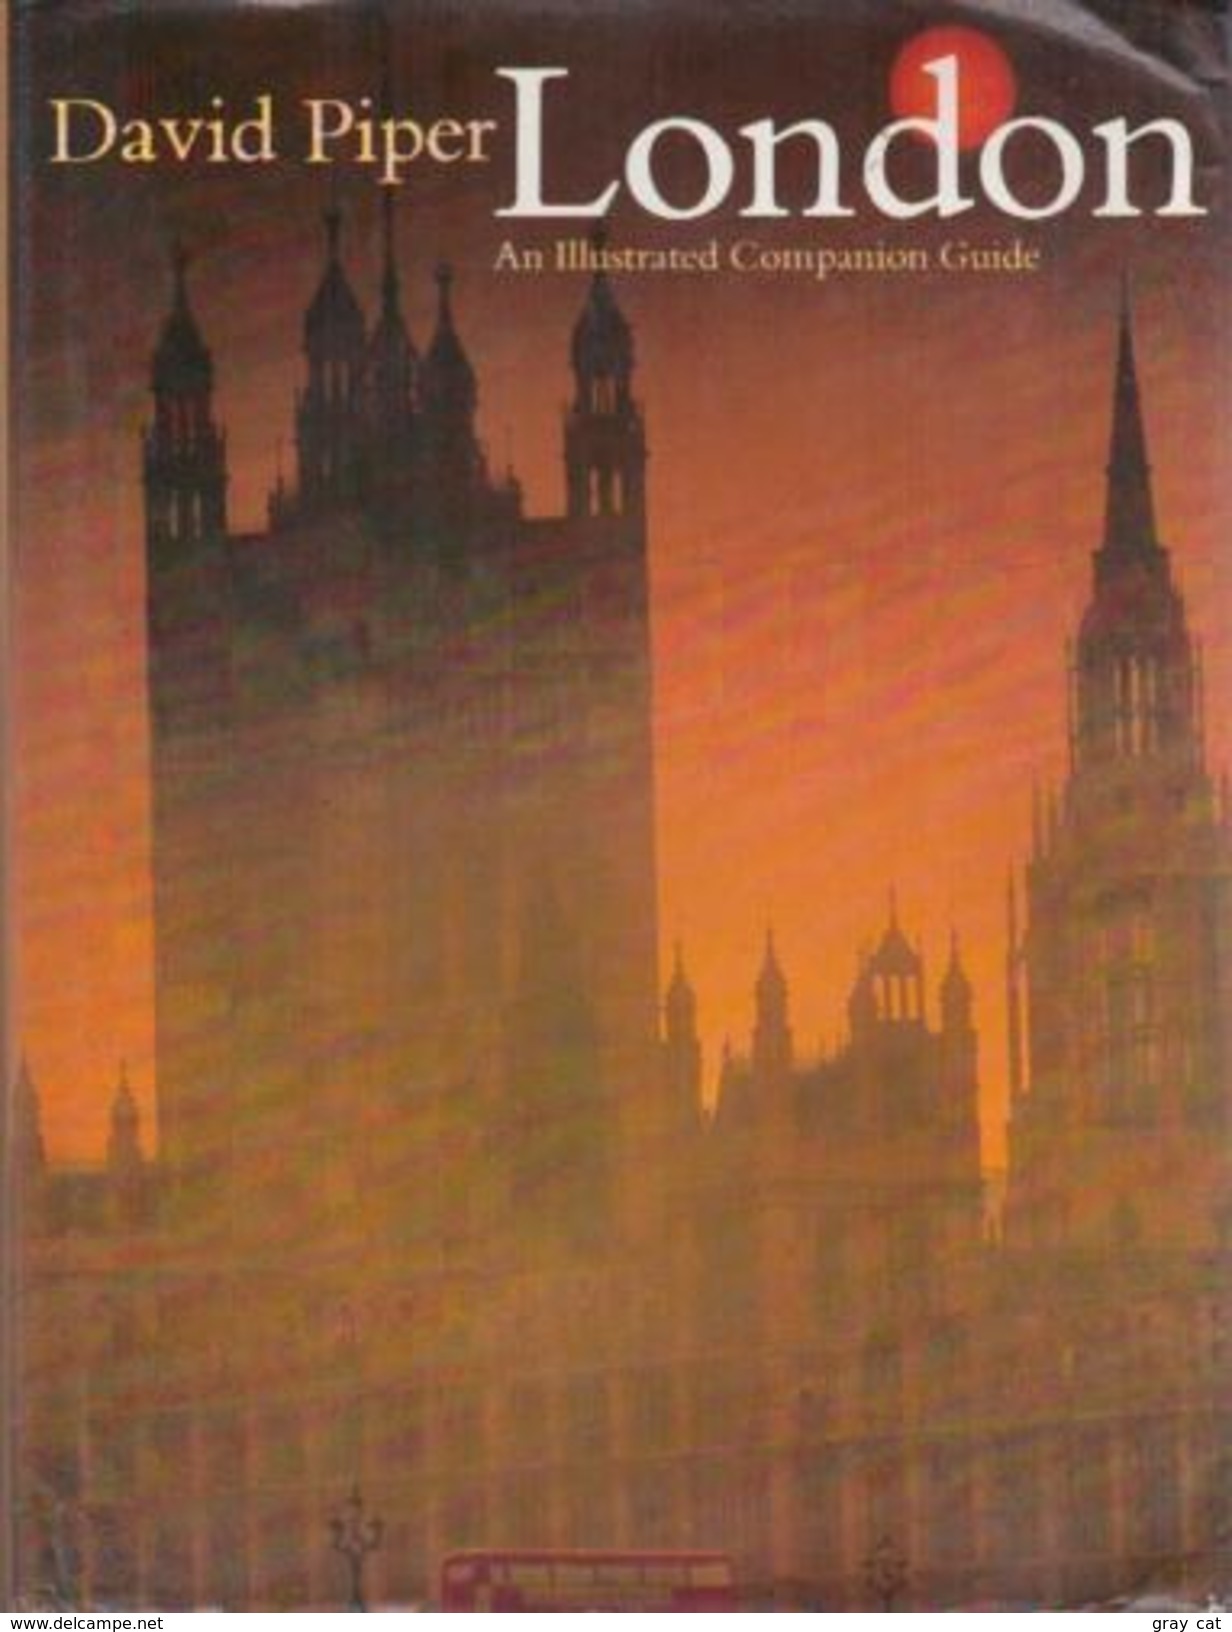 London An Illustrated Companion Guide By Piper, David (ISBN 9780002162876) - Voyage/ Exploration